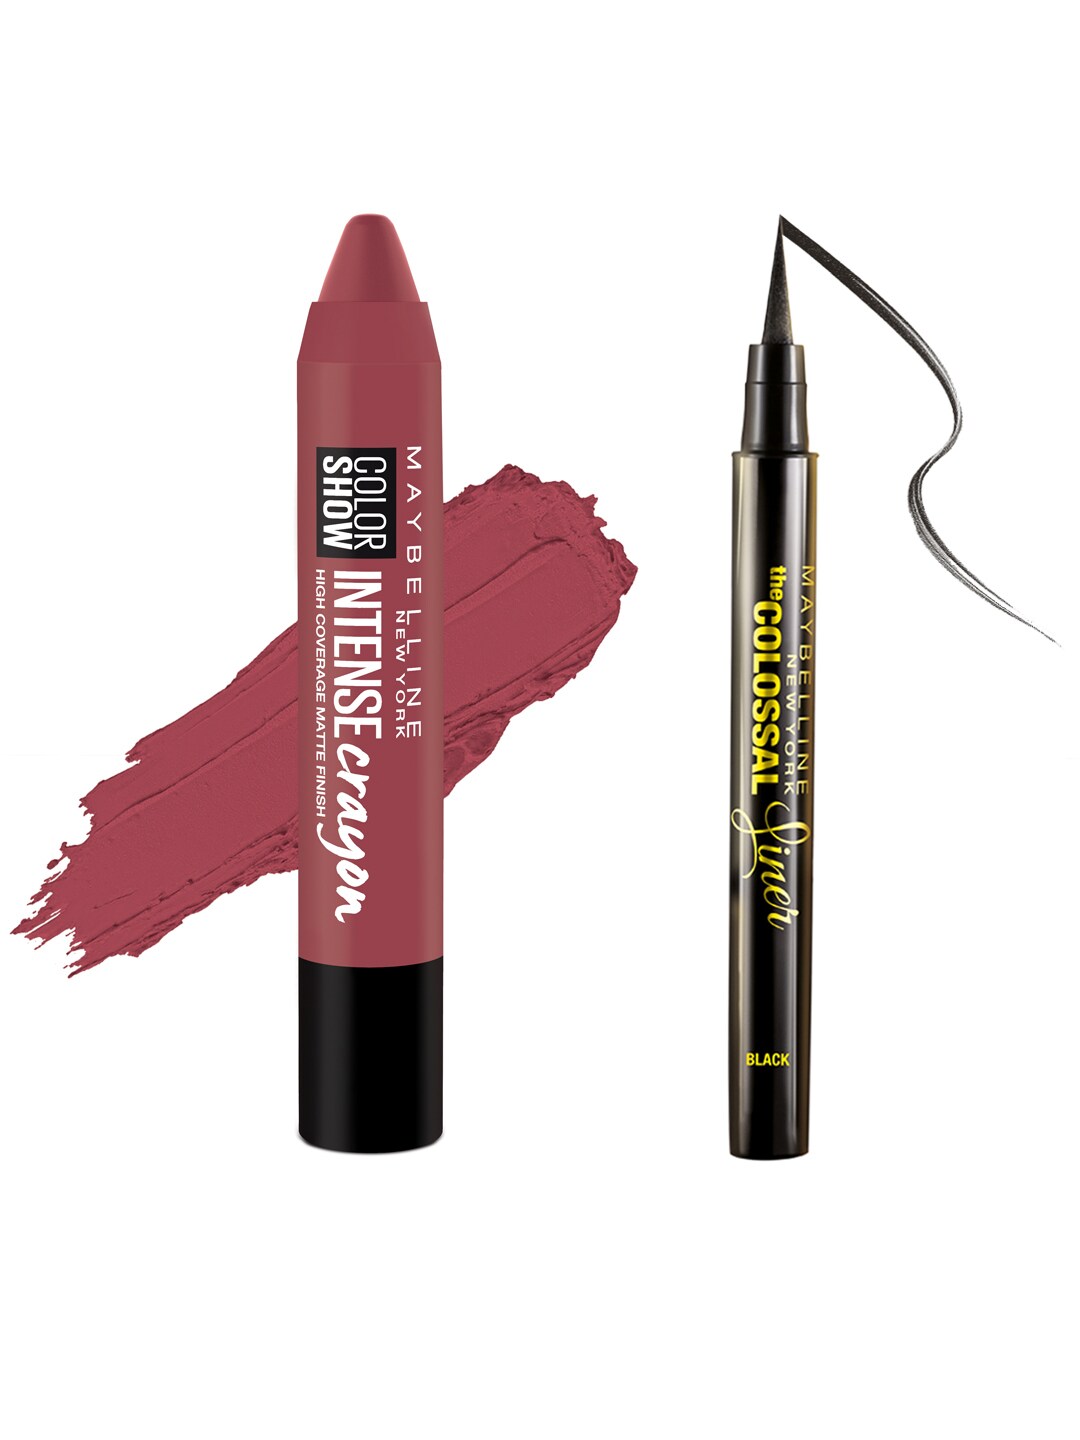 Maybelline The Colossal Liner & Intense Crayon Mystic Mauve Lipstick Price in India